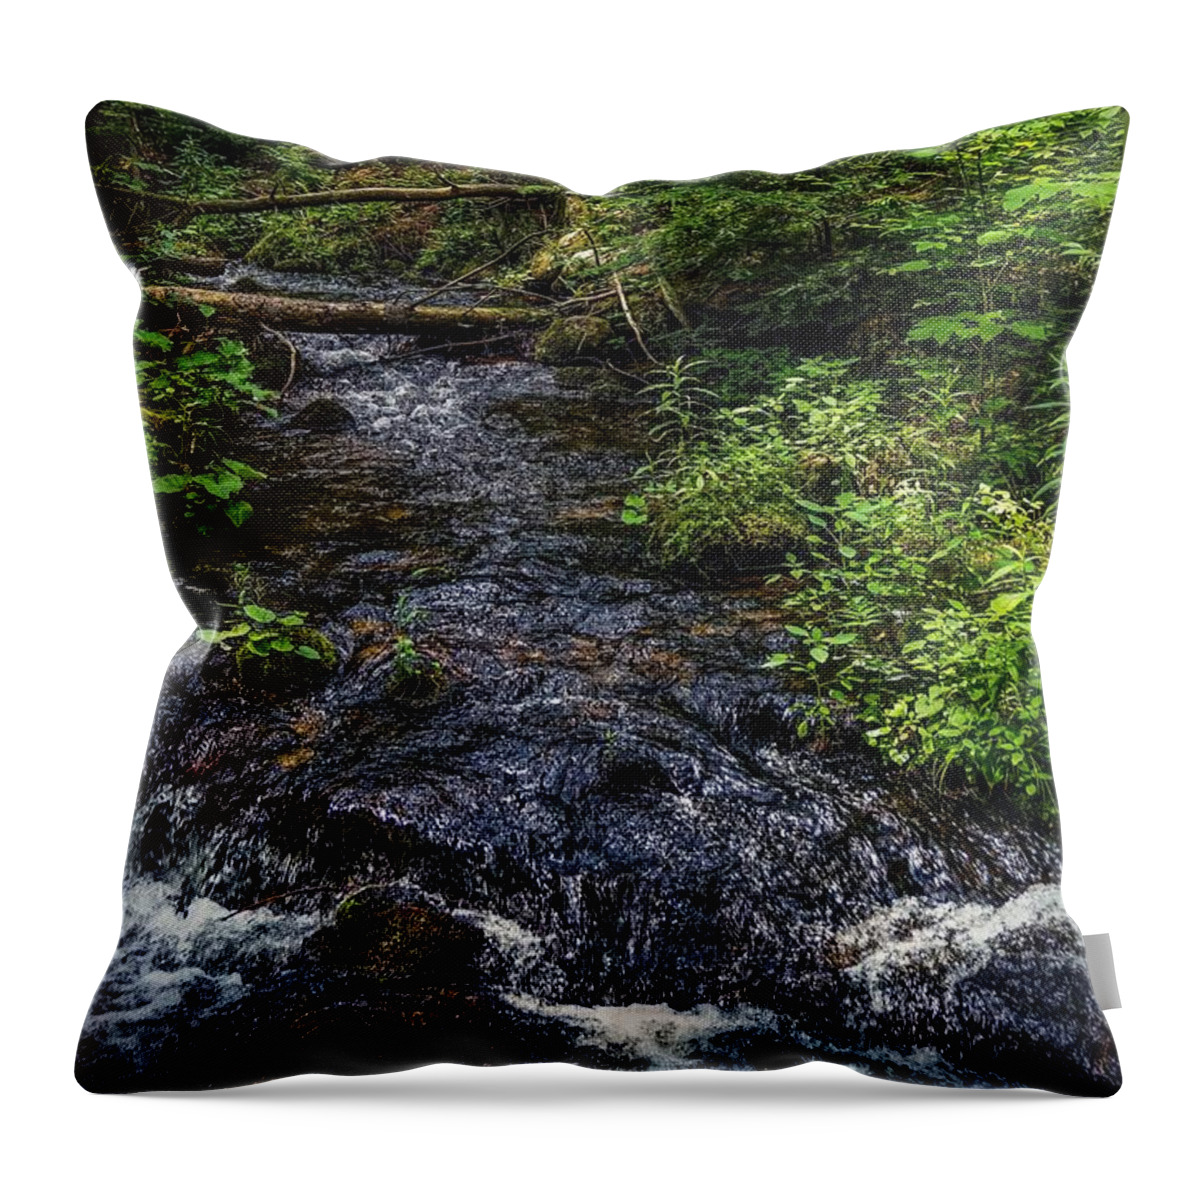  Throw Pillow featuring the photograph Streaming by Kendall McKernon